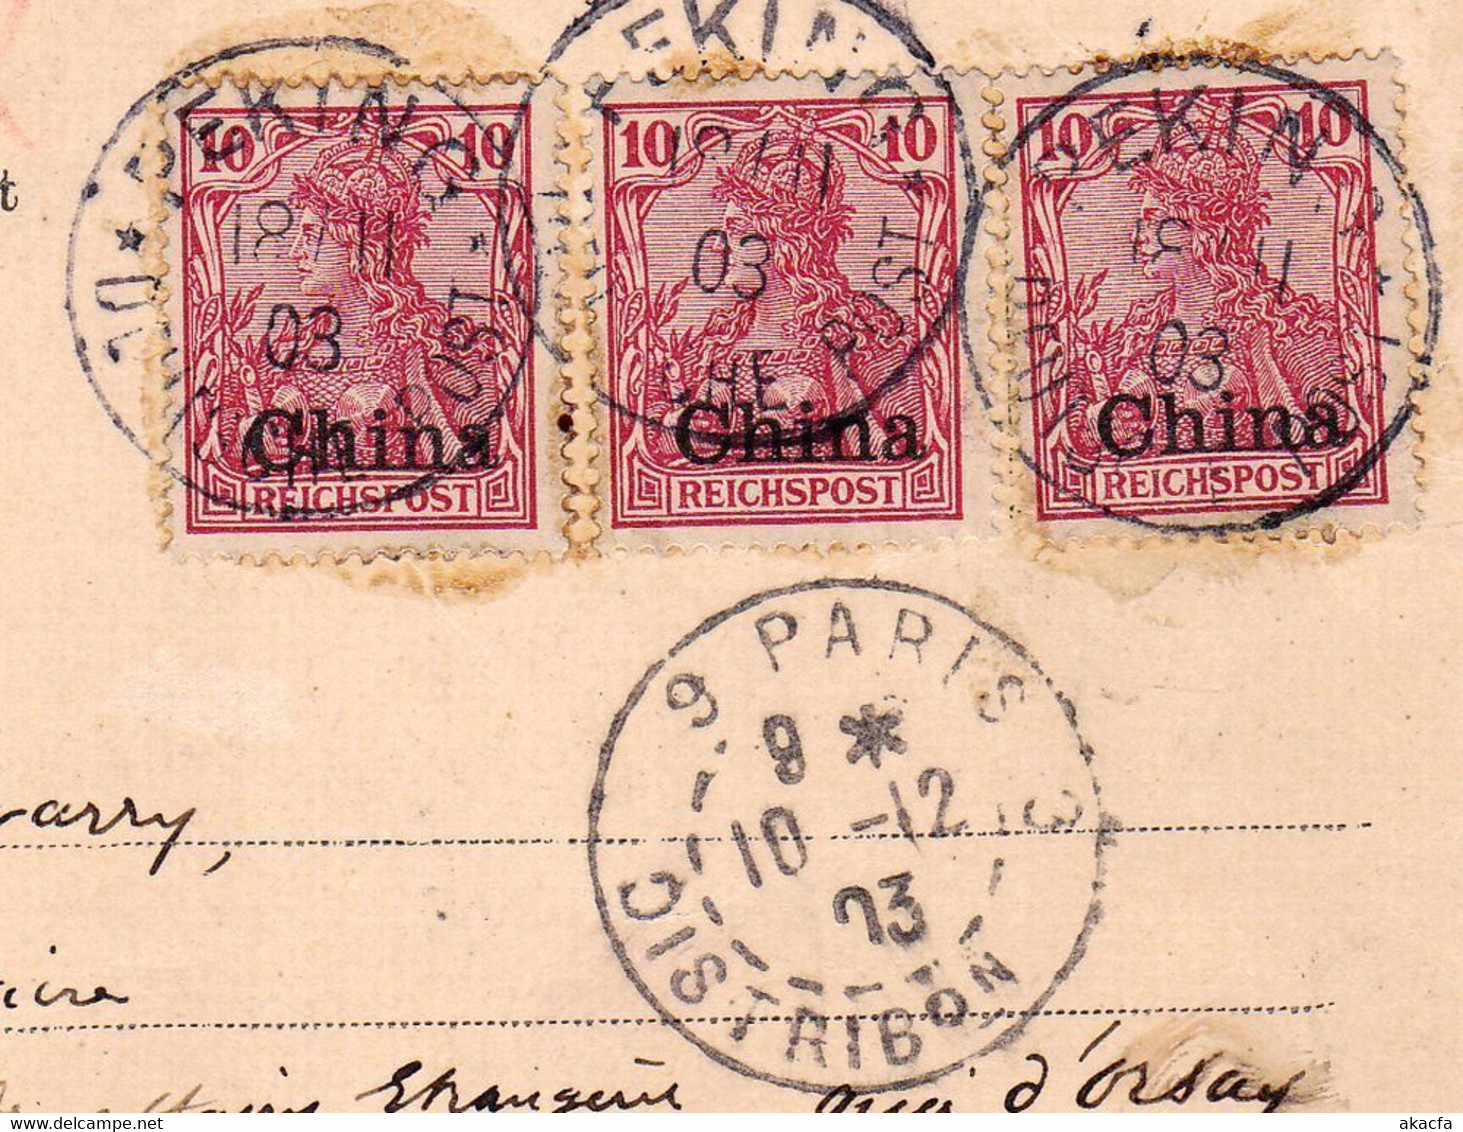 CHINA Peking German Post 1903 Registered Cover Postcard To France Paris (c008) - Covers & Documents